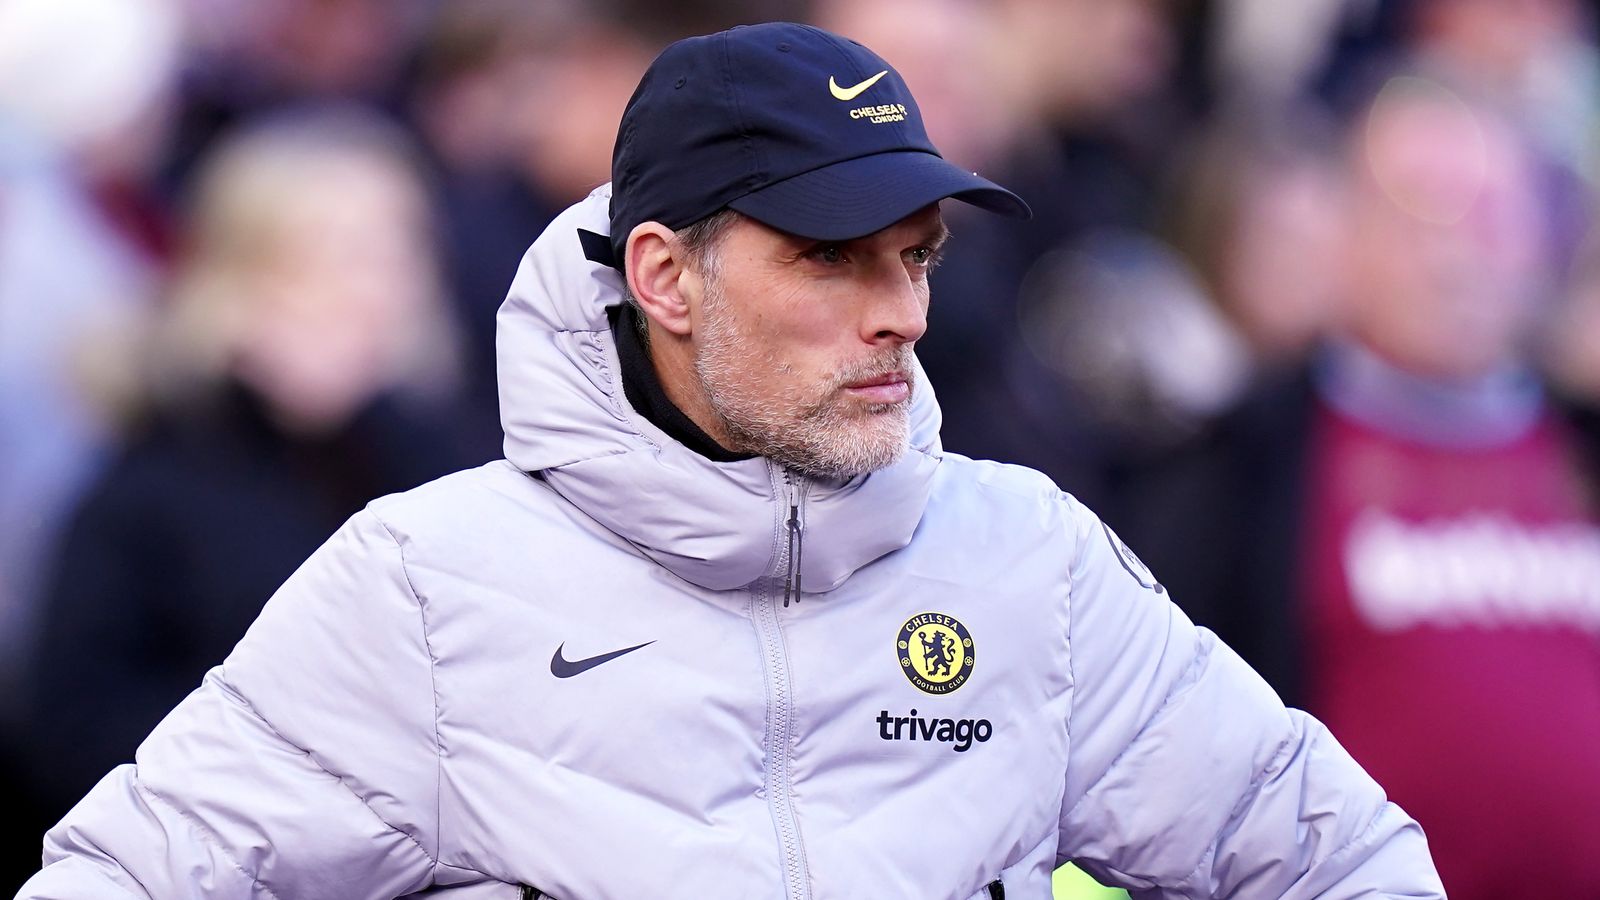 Thomas Tuchel drafts in U23 and academy players for Chelsea's trip to Brentford in bid to 'protect' squad